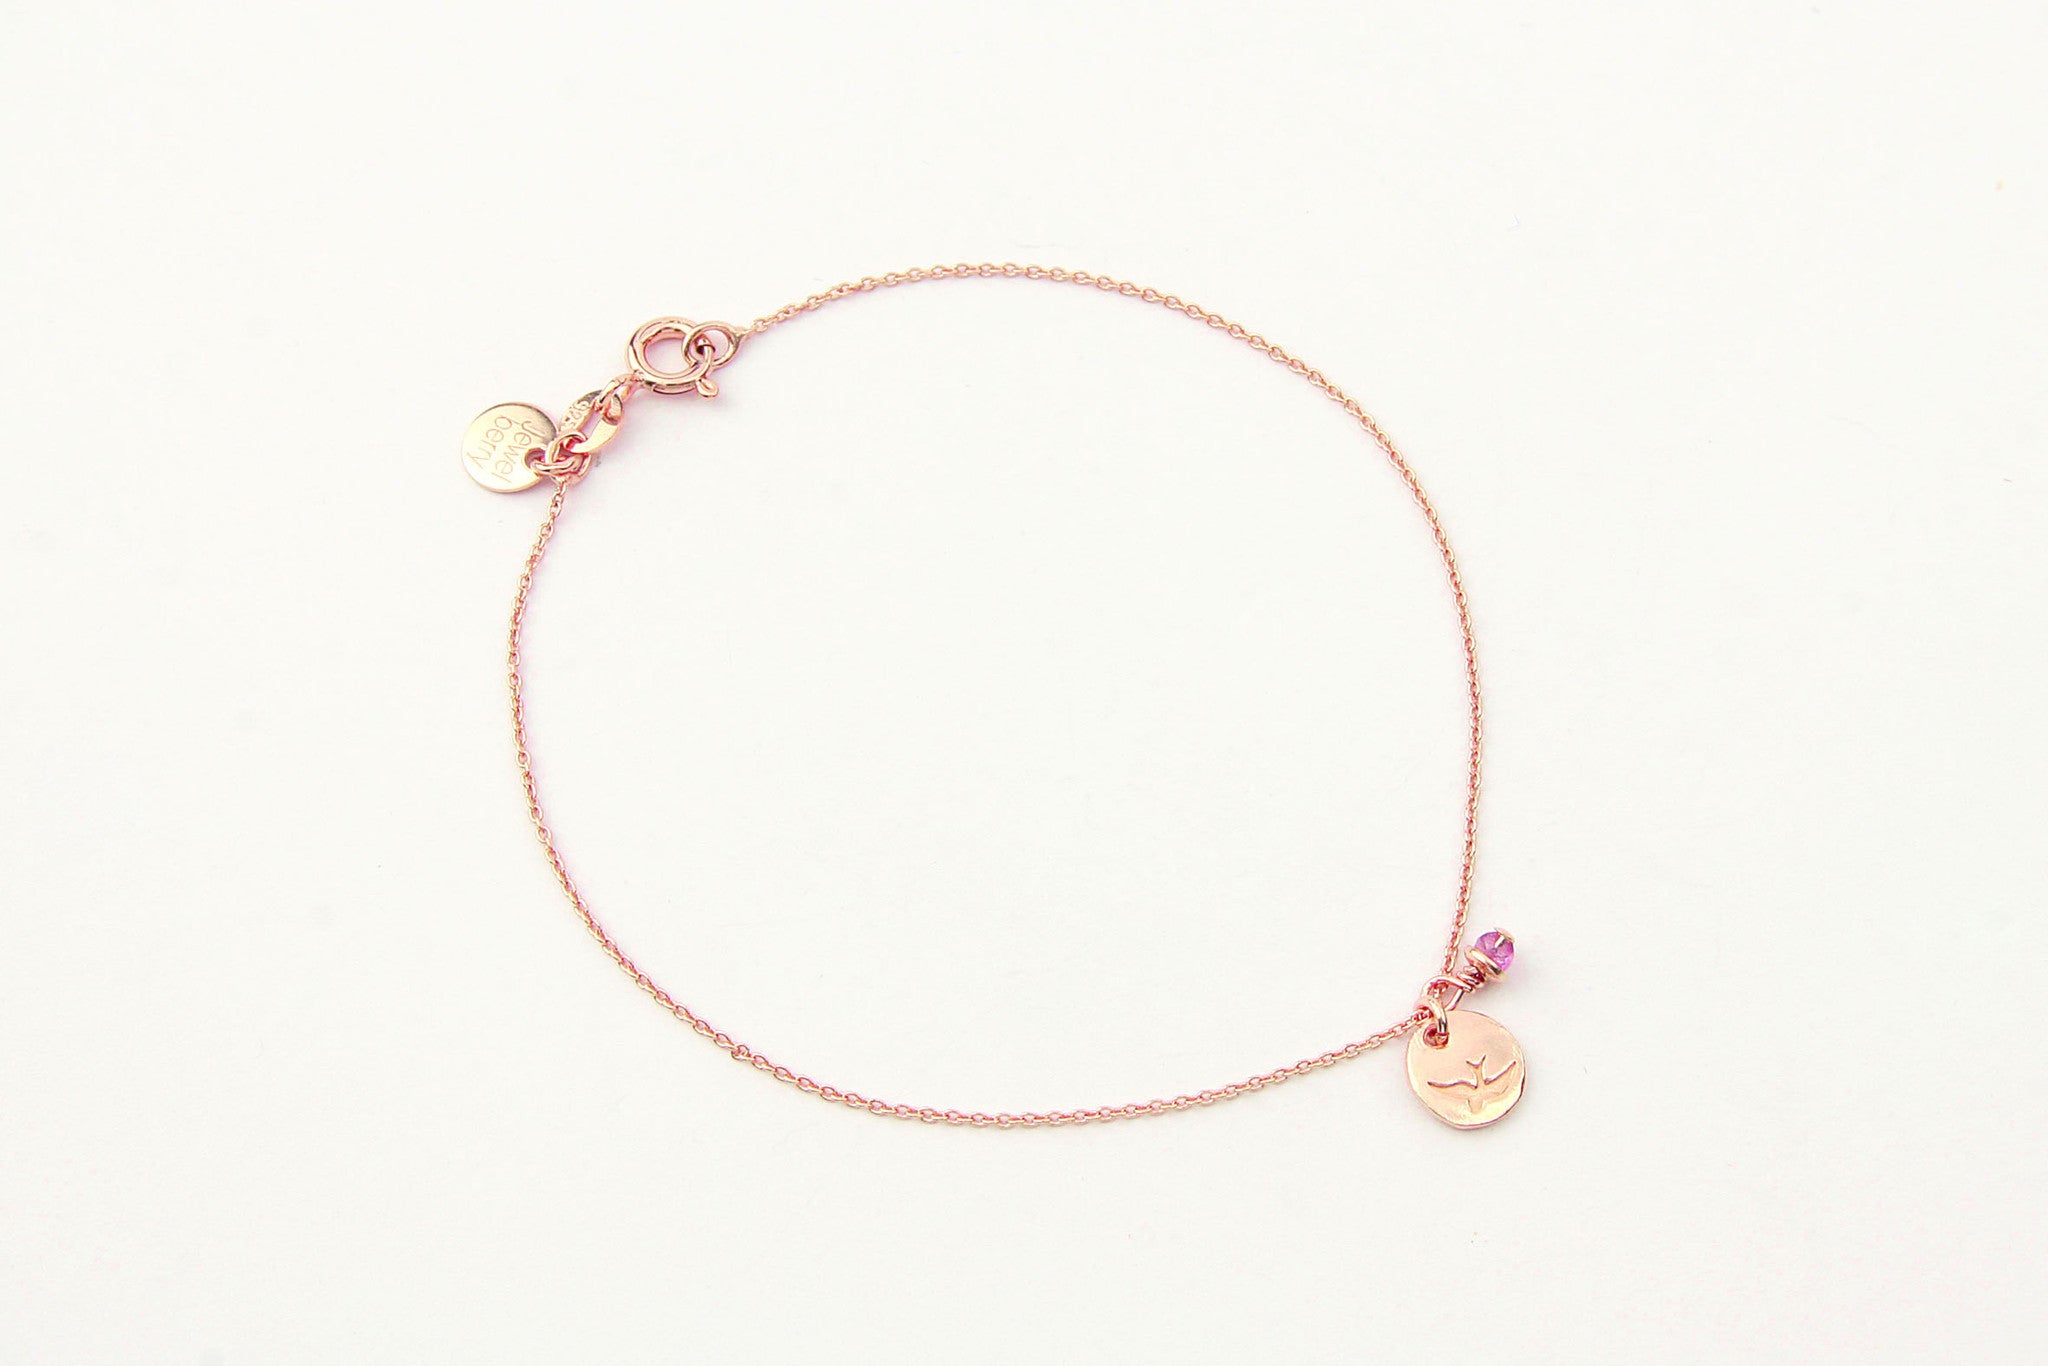 jewelberry armband bracelet bird token rose gold plated sterling silver fine jewelry handmade with love fairtrade anchor chain